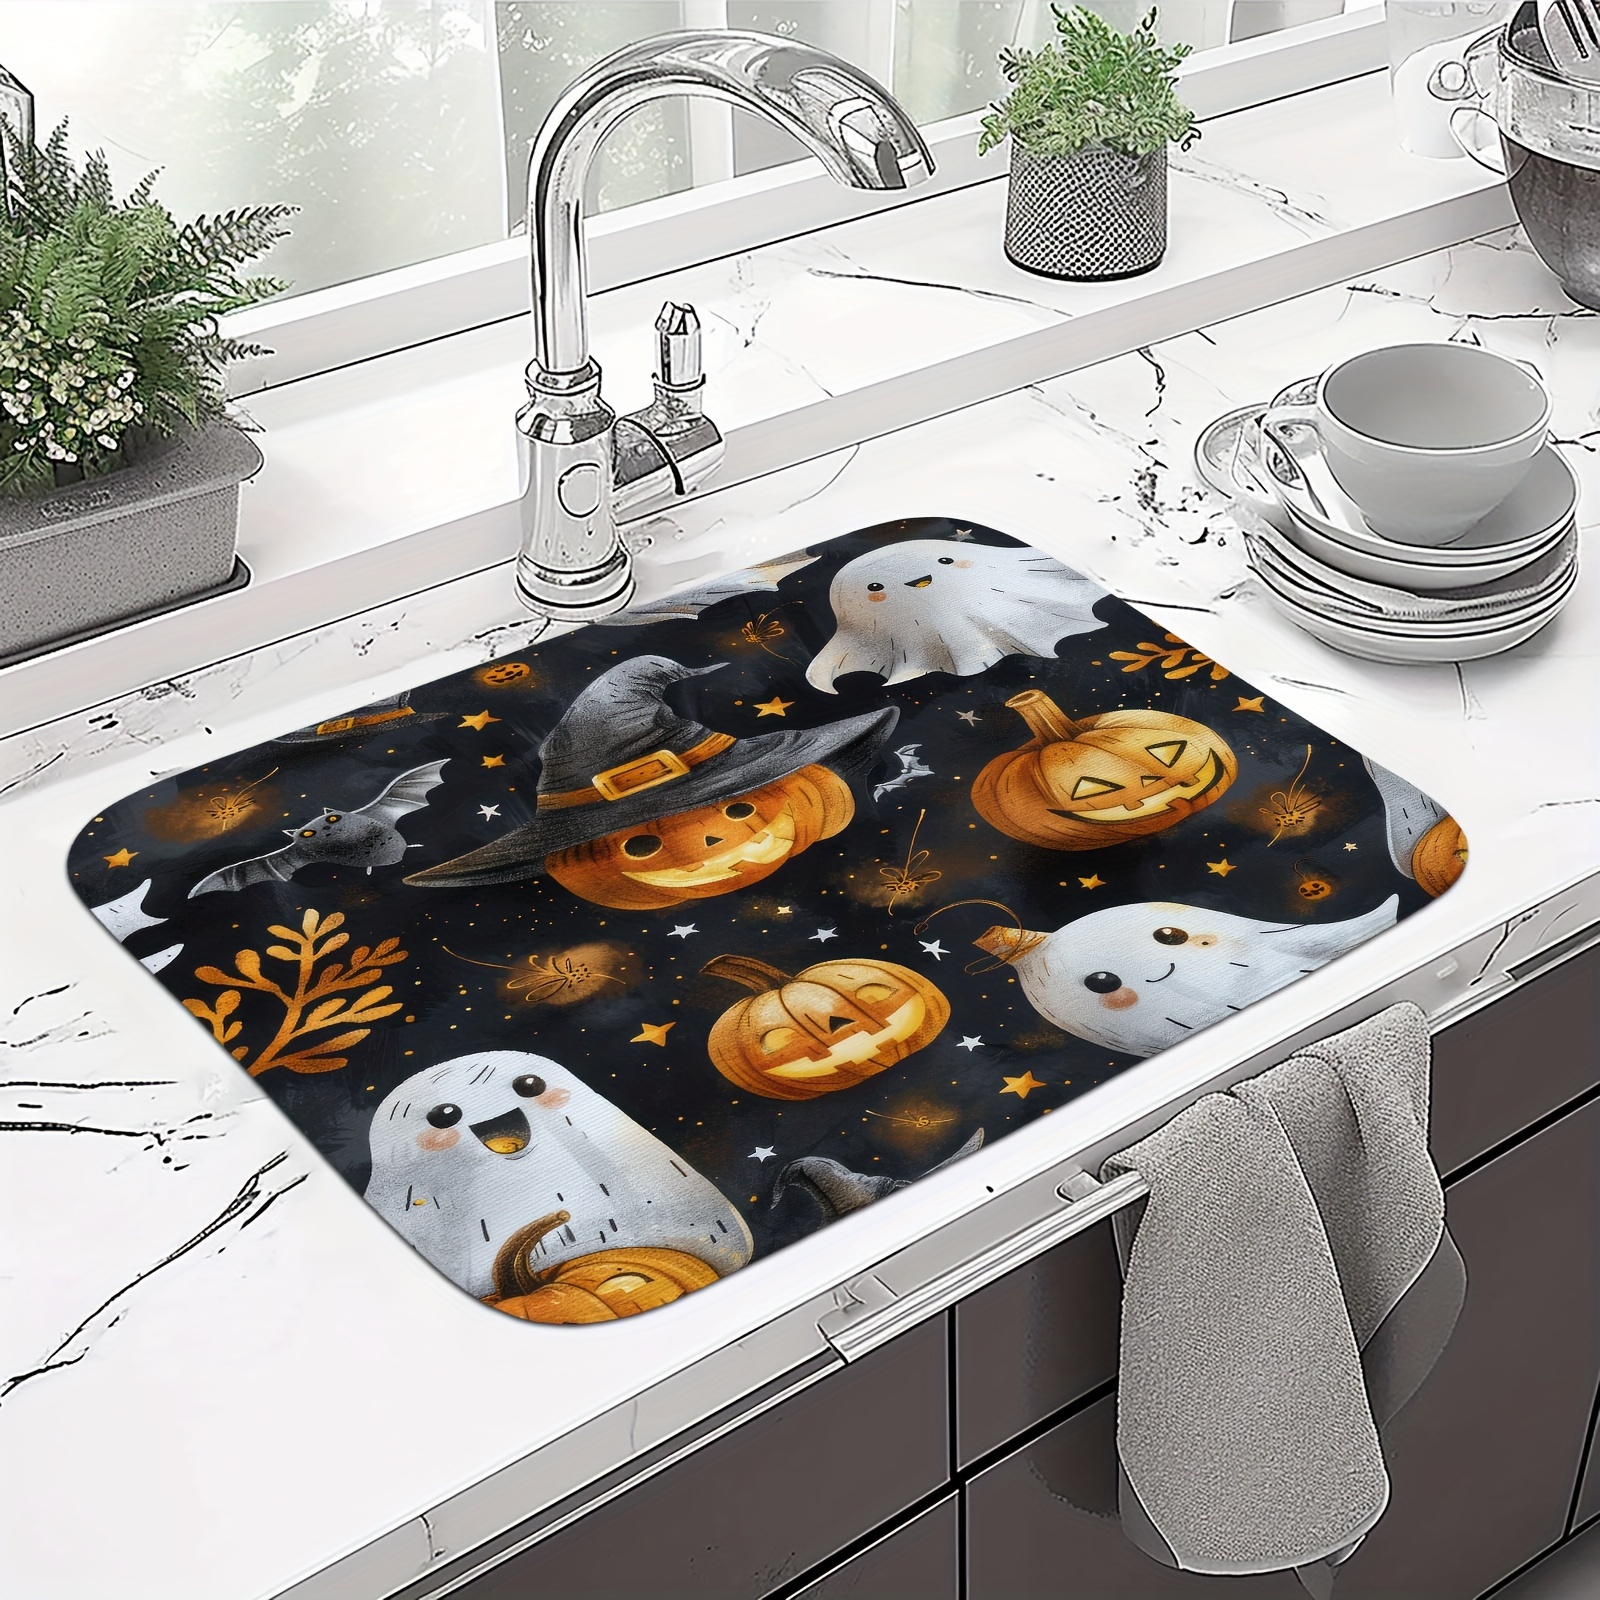 

Halloween Dish Drying Mats - Set Of 1, Polyester Microfiber With Memory Foam Filling, Absorbent Glass Cloth With Breathable Mesh, Ghosts And Pumpkins Design, Kitchen Counter Accessories.